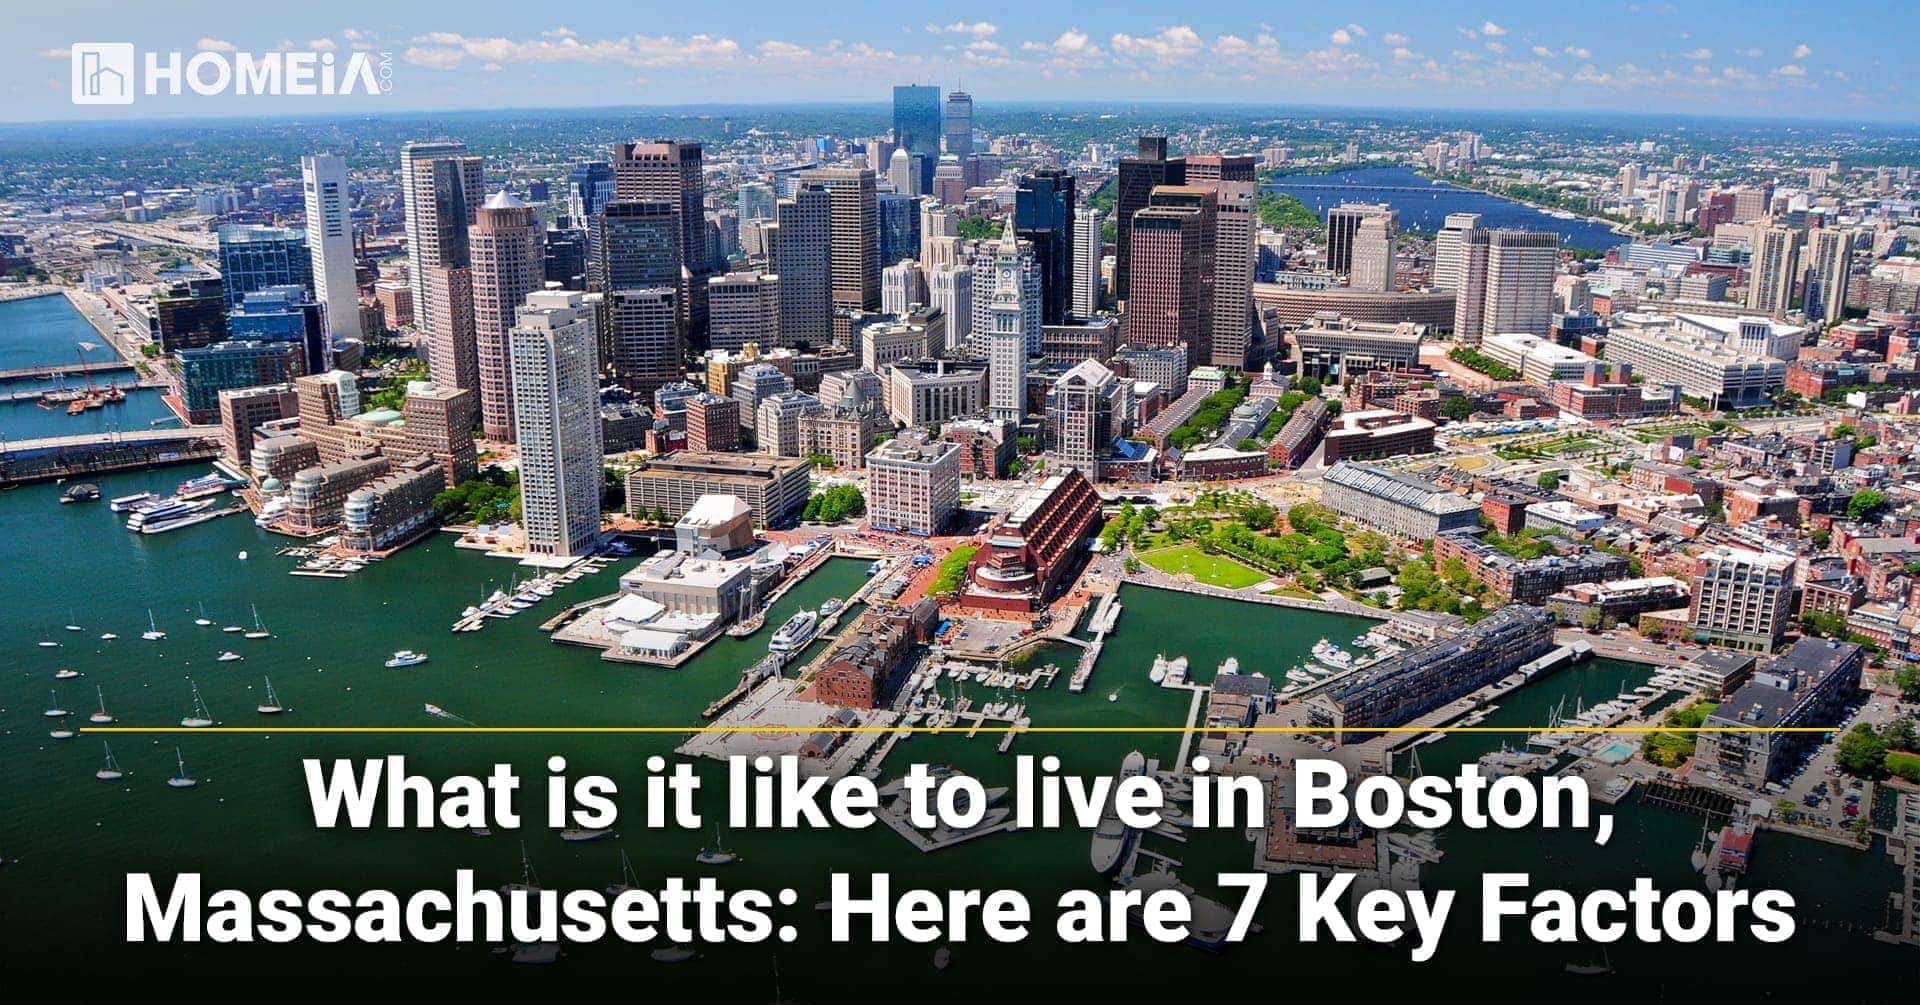 The 7 Key Factors to Know Before Moving to Boston, Massachusetts